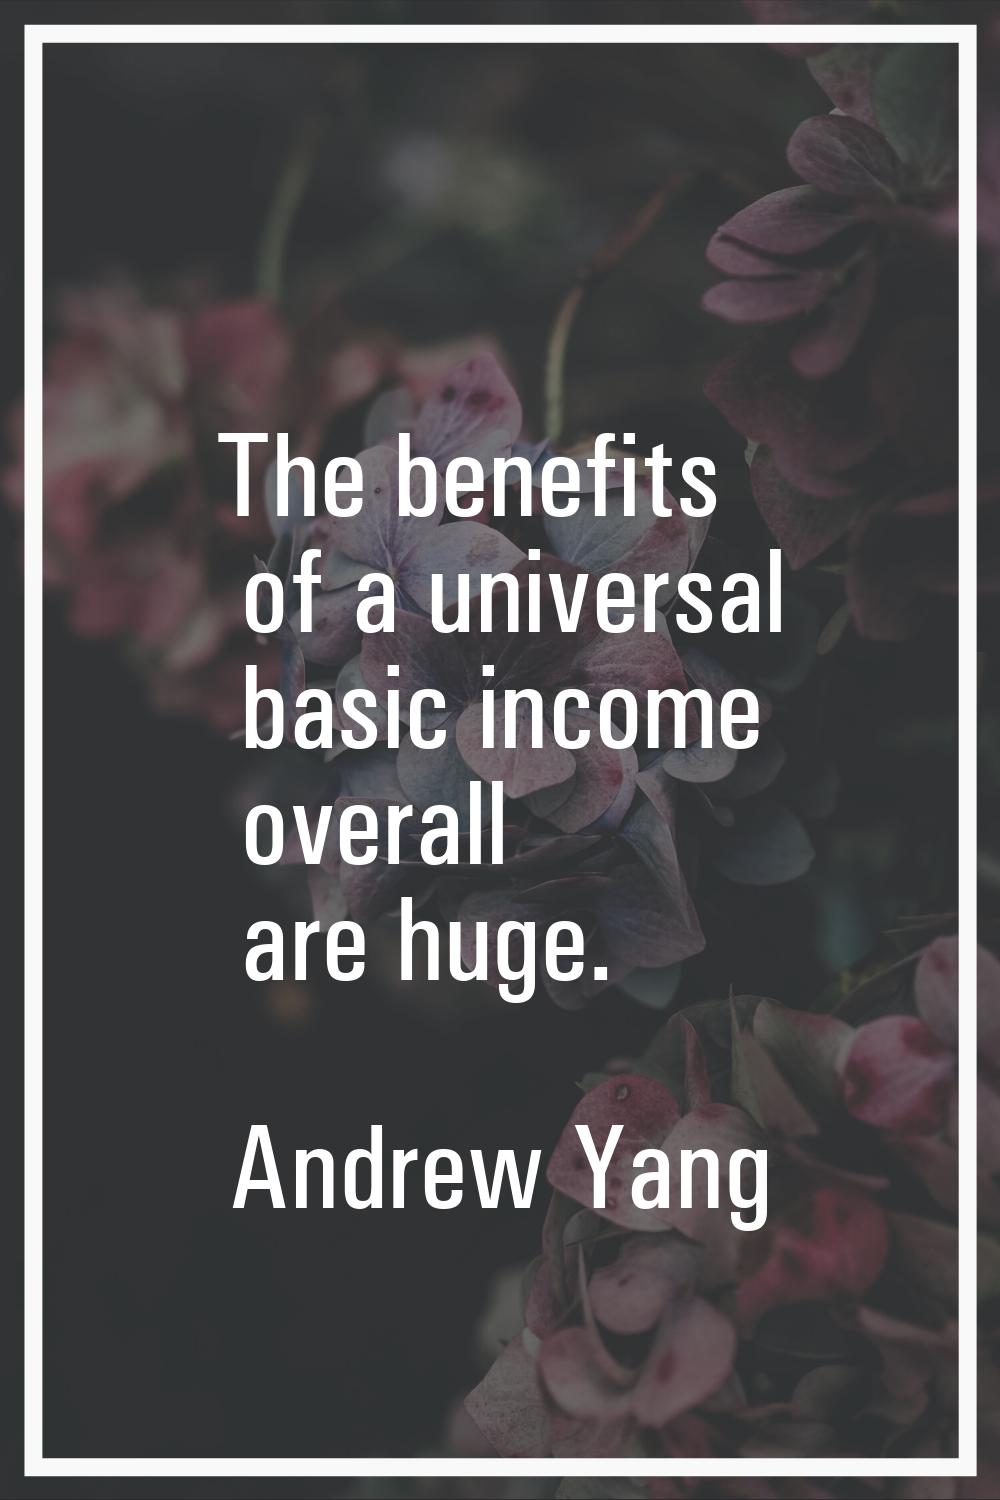 The benefits of a universal basic income overall are huge.